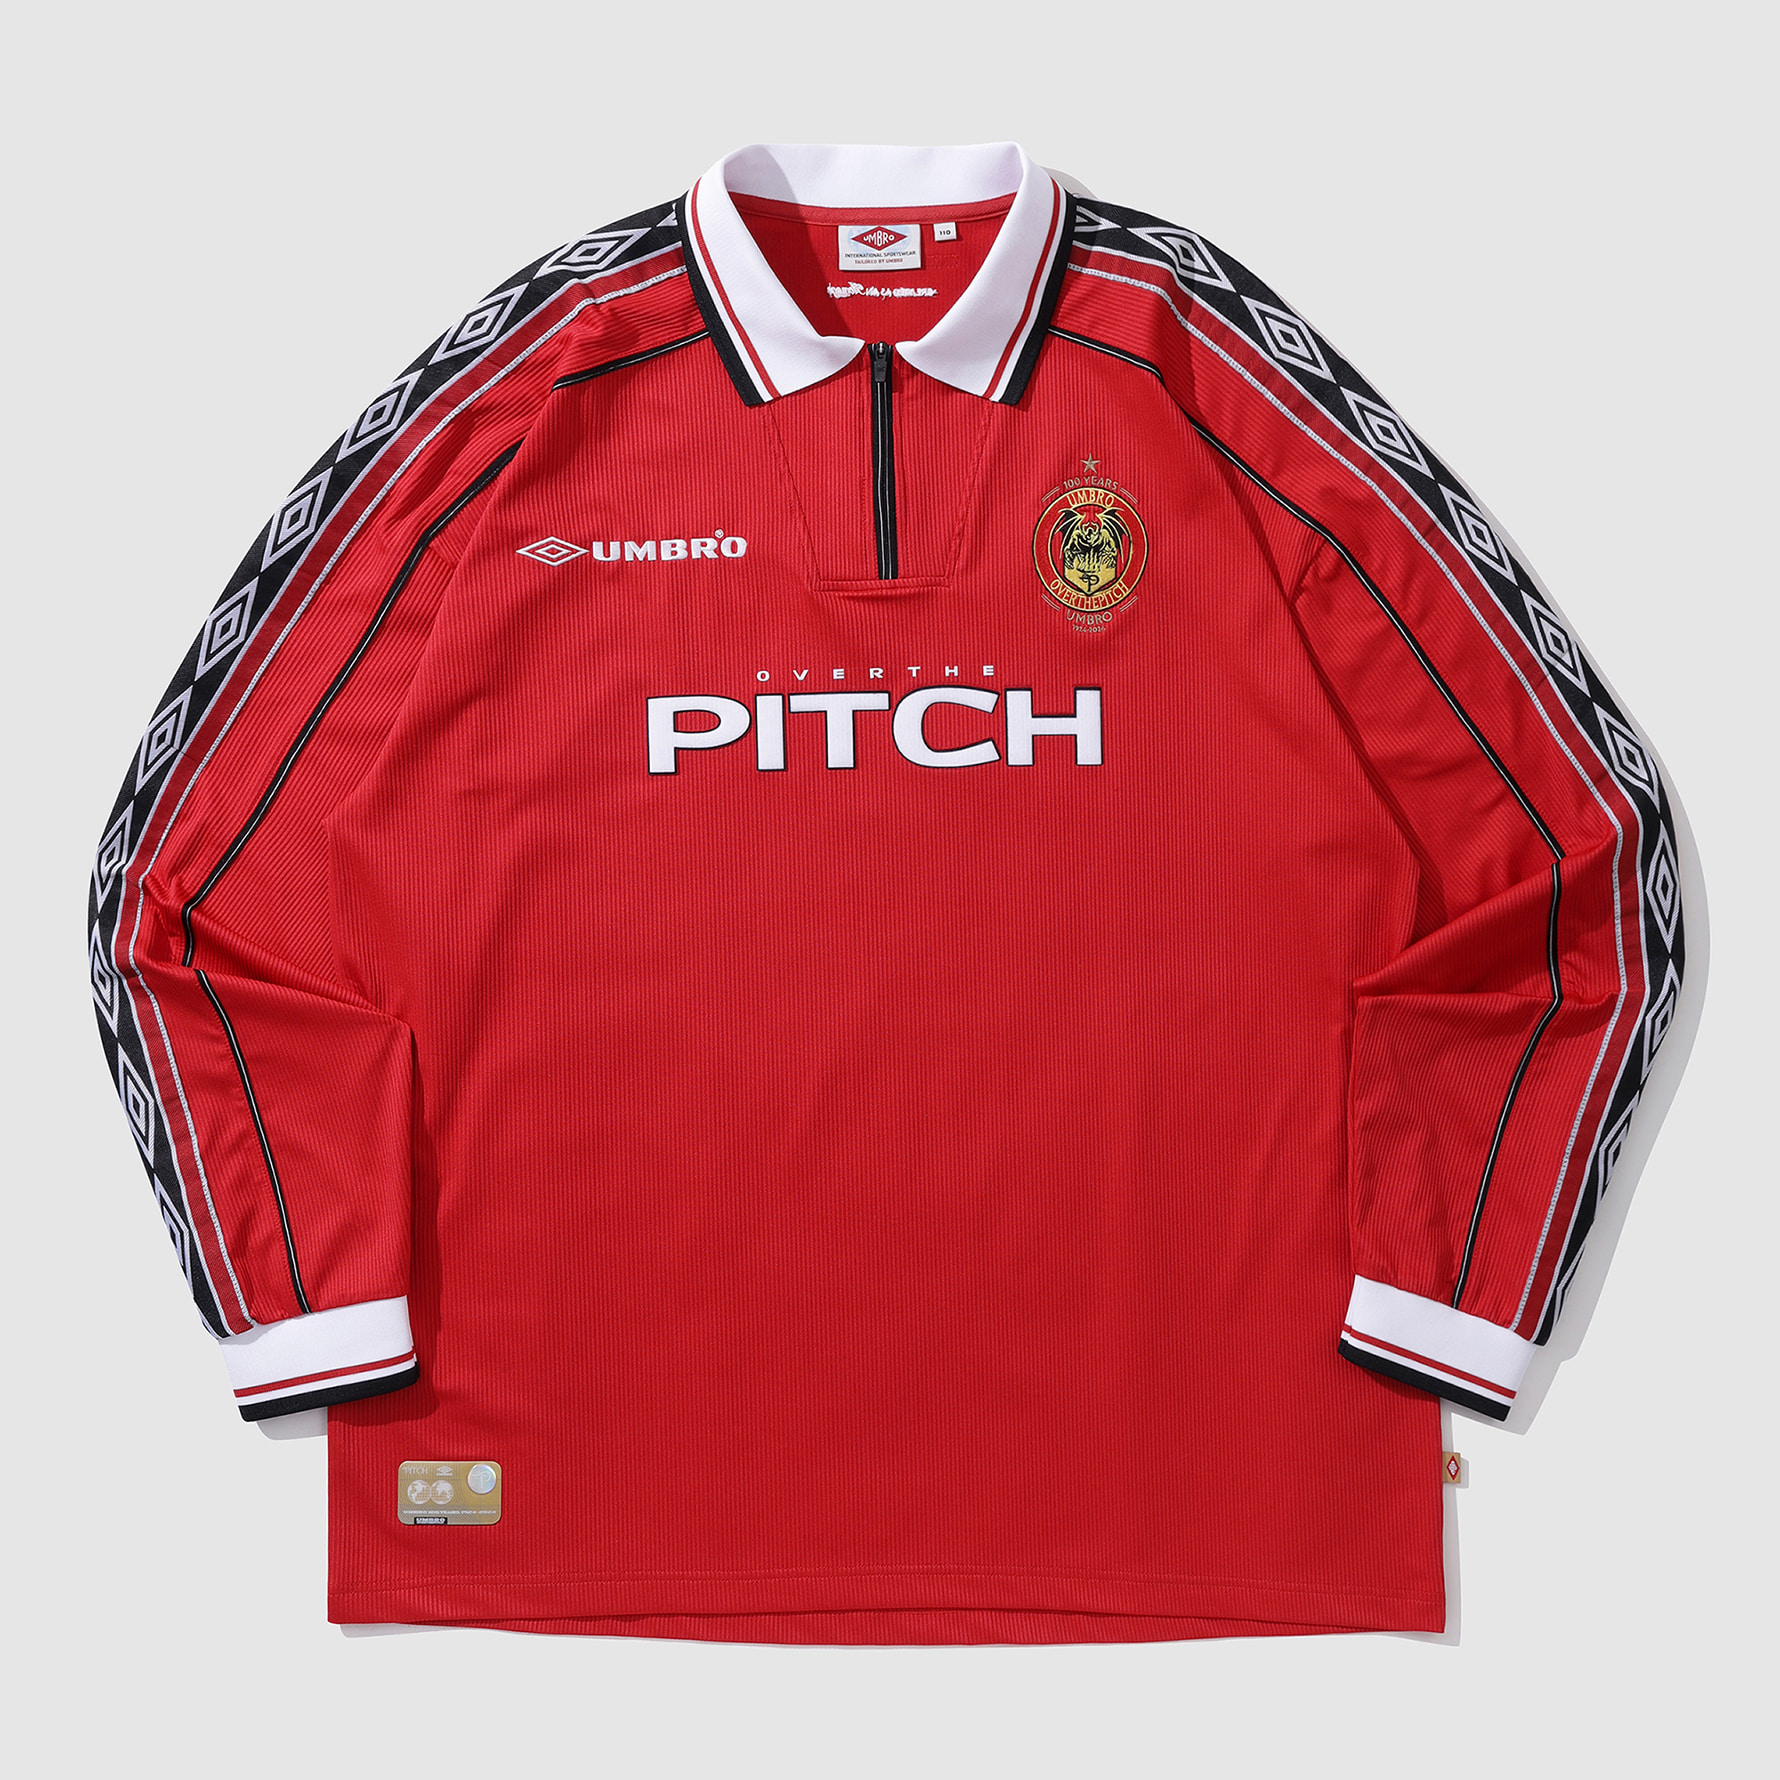 OVER THE PITCH X UMBRO 100TH ANNIVERSARY HOMAGE FOOTBALL JERSEY